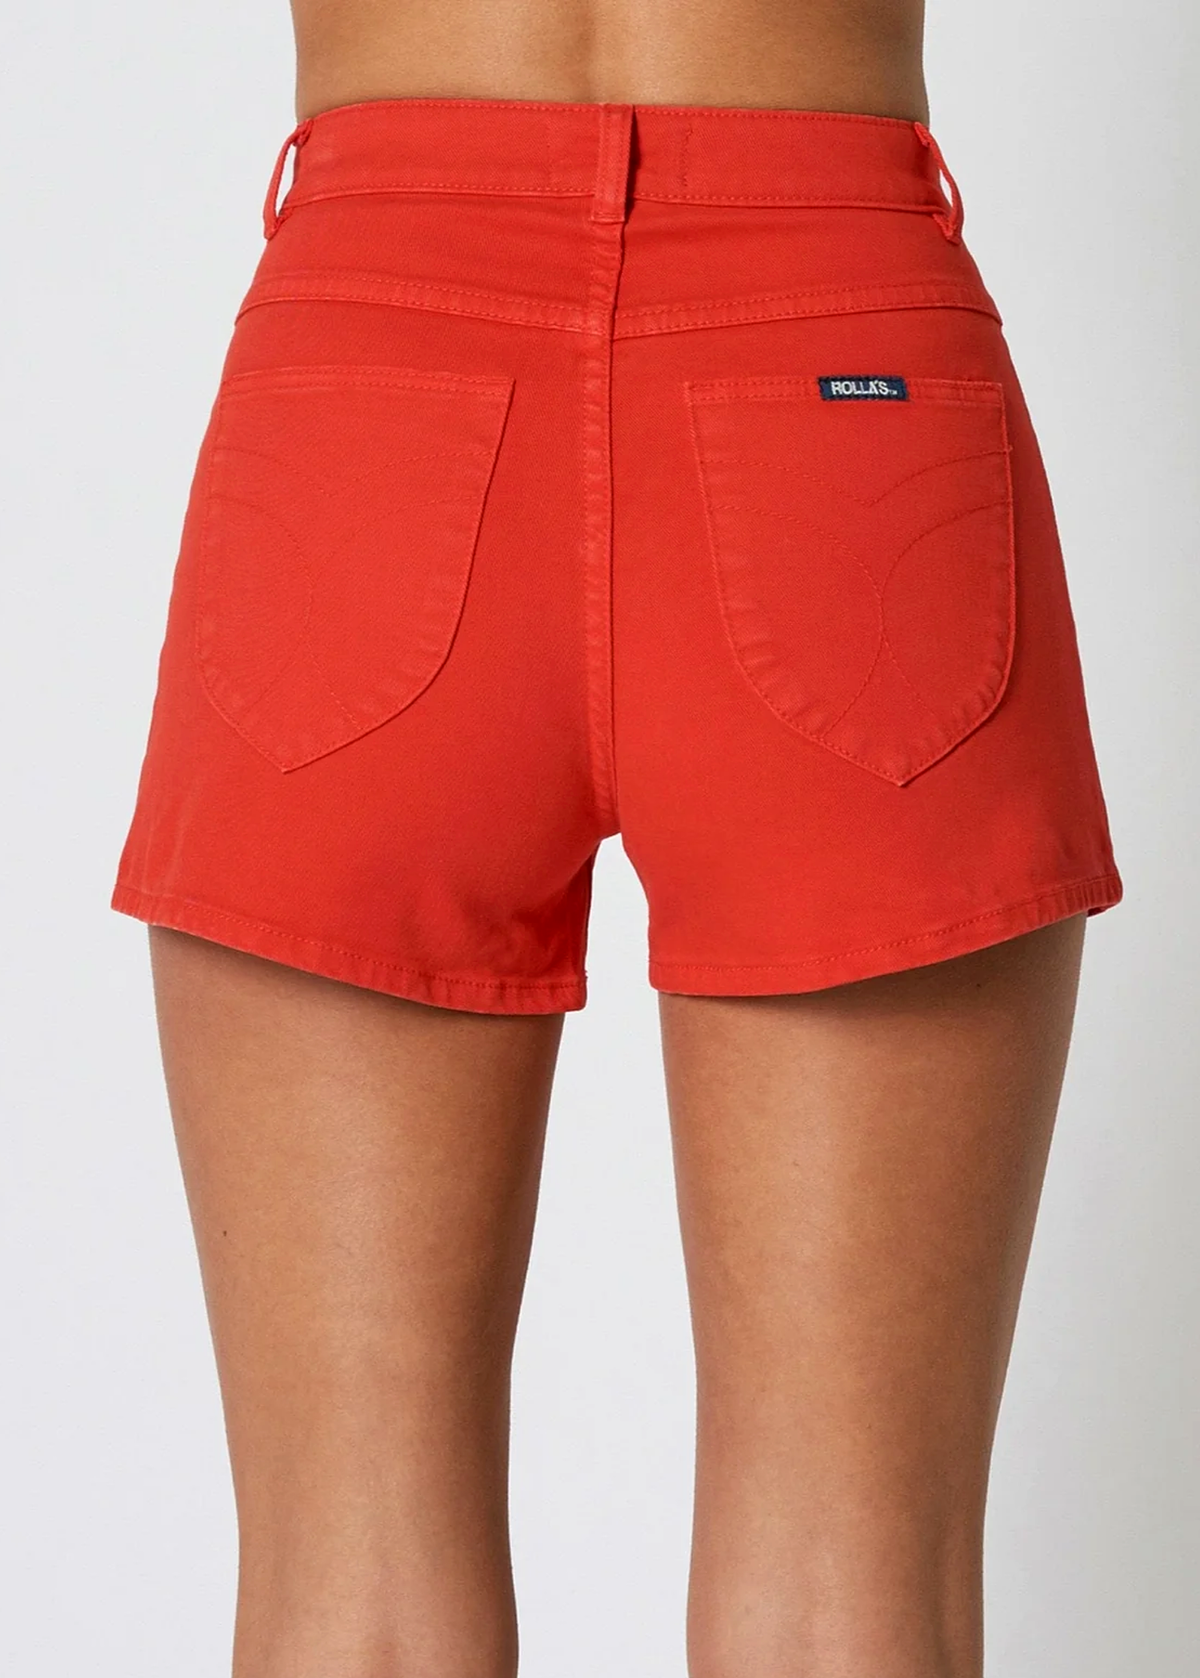 70s inspired Blood Orange Red high rise waist Sailor Patch Front Pocket Stretch Cotton Denim Shorts by Rolla's Jeans